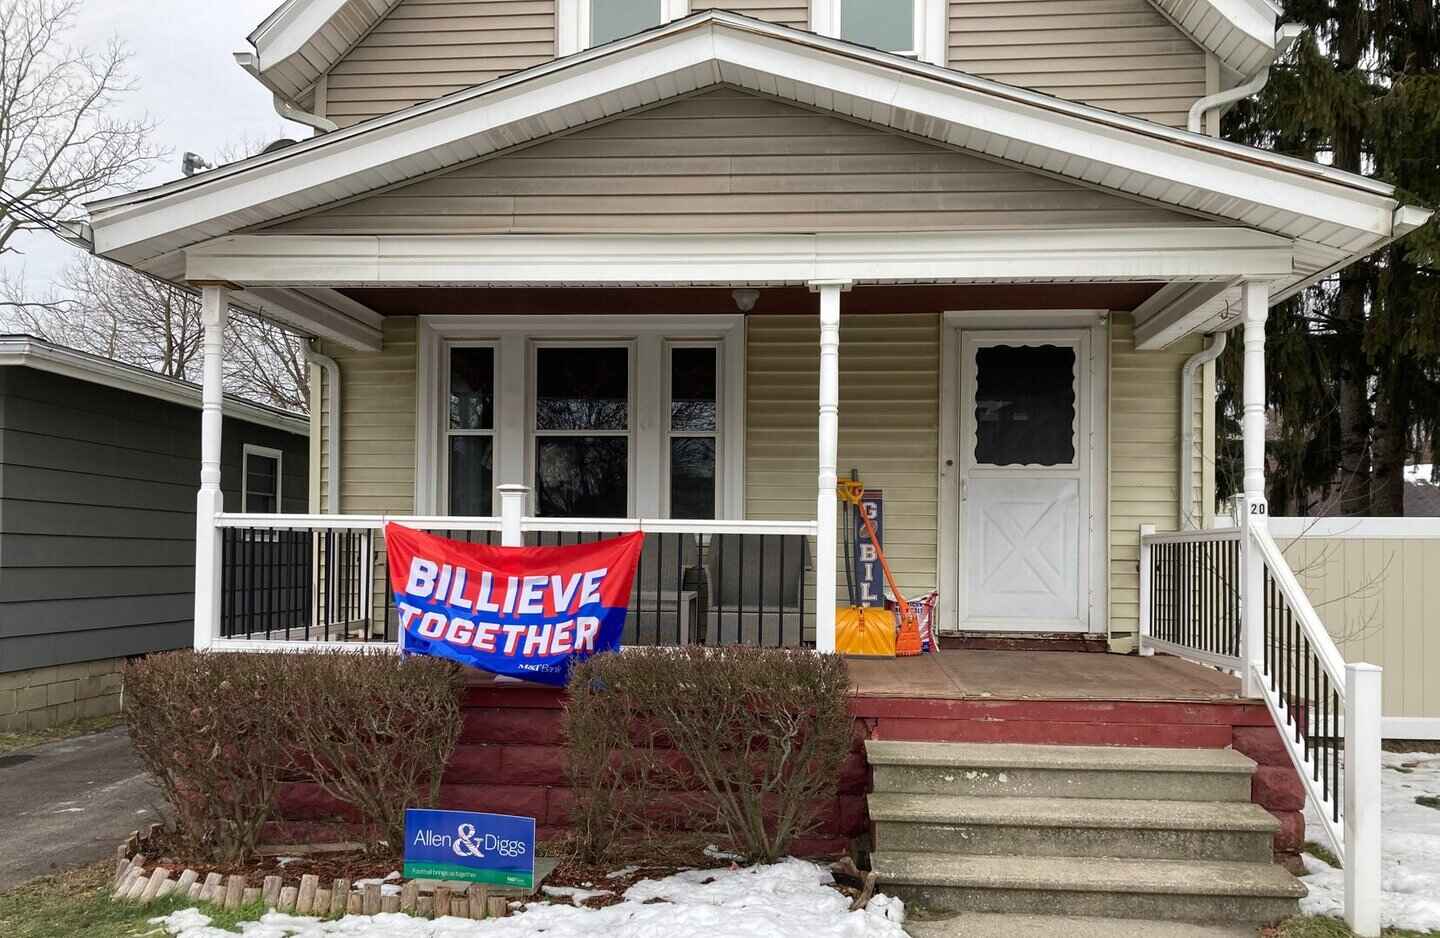 Fan banners and signs still adorning a house in Buffalo's Schiller Park neighborhood, February 5, 2023.